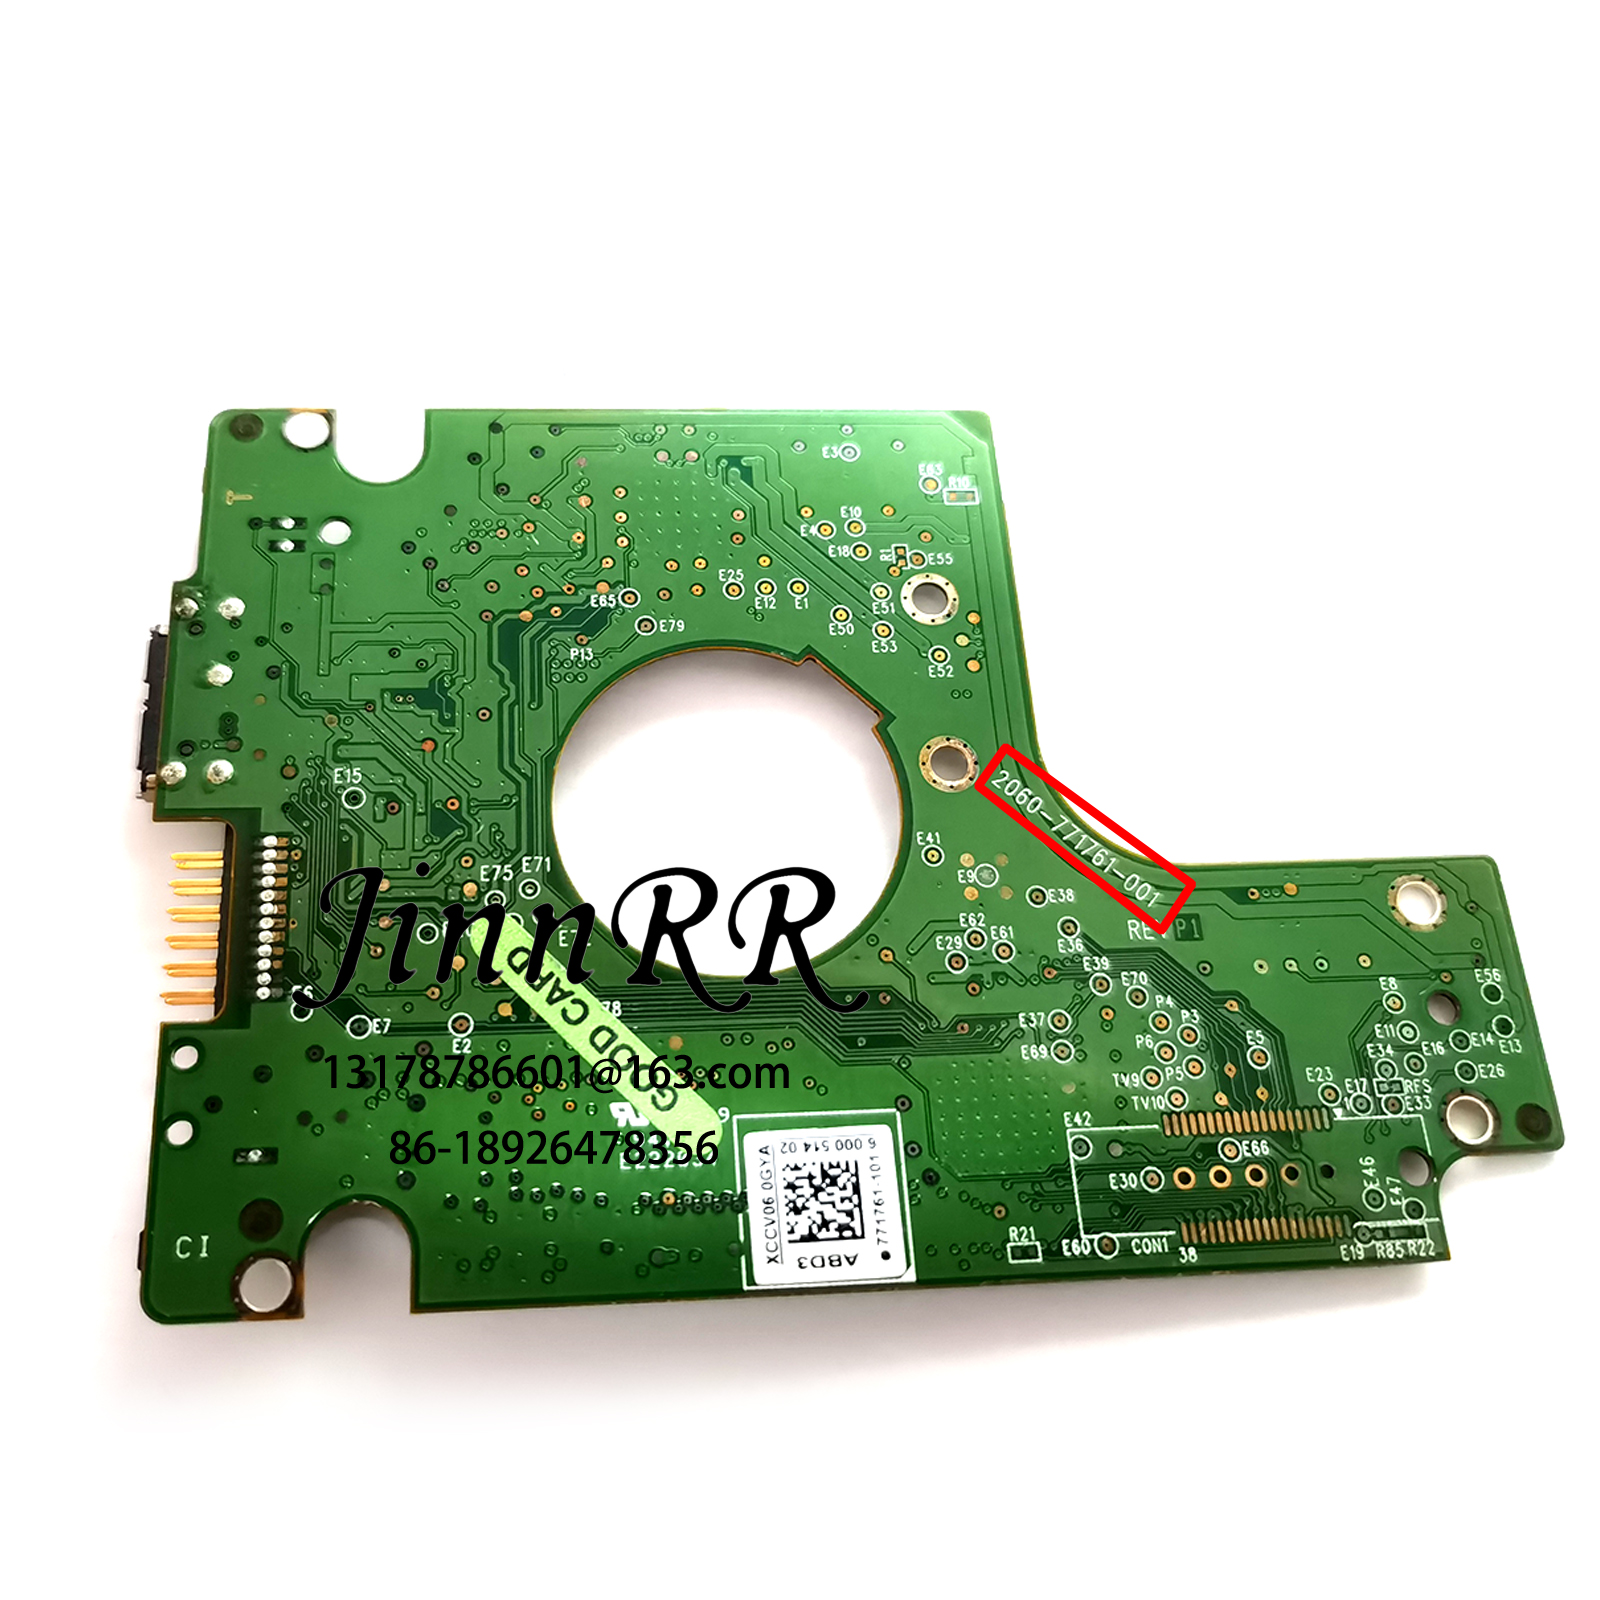 PCB circuit board 2060-771761-001 REV A/P1 for WD 2.5 SATA hard drive repair data recovery WD5000KMVW-11ZSMS4 2060-771761-001